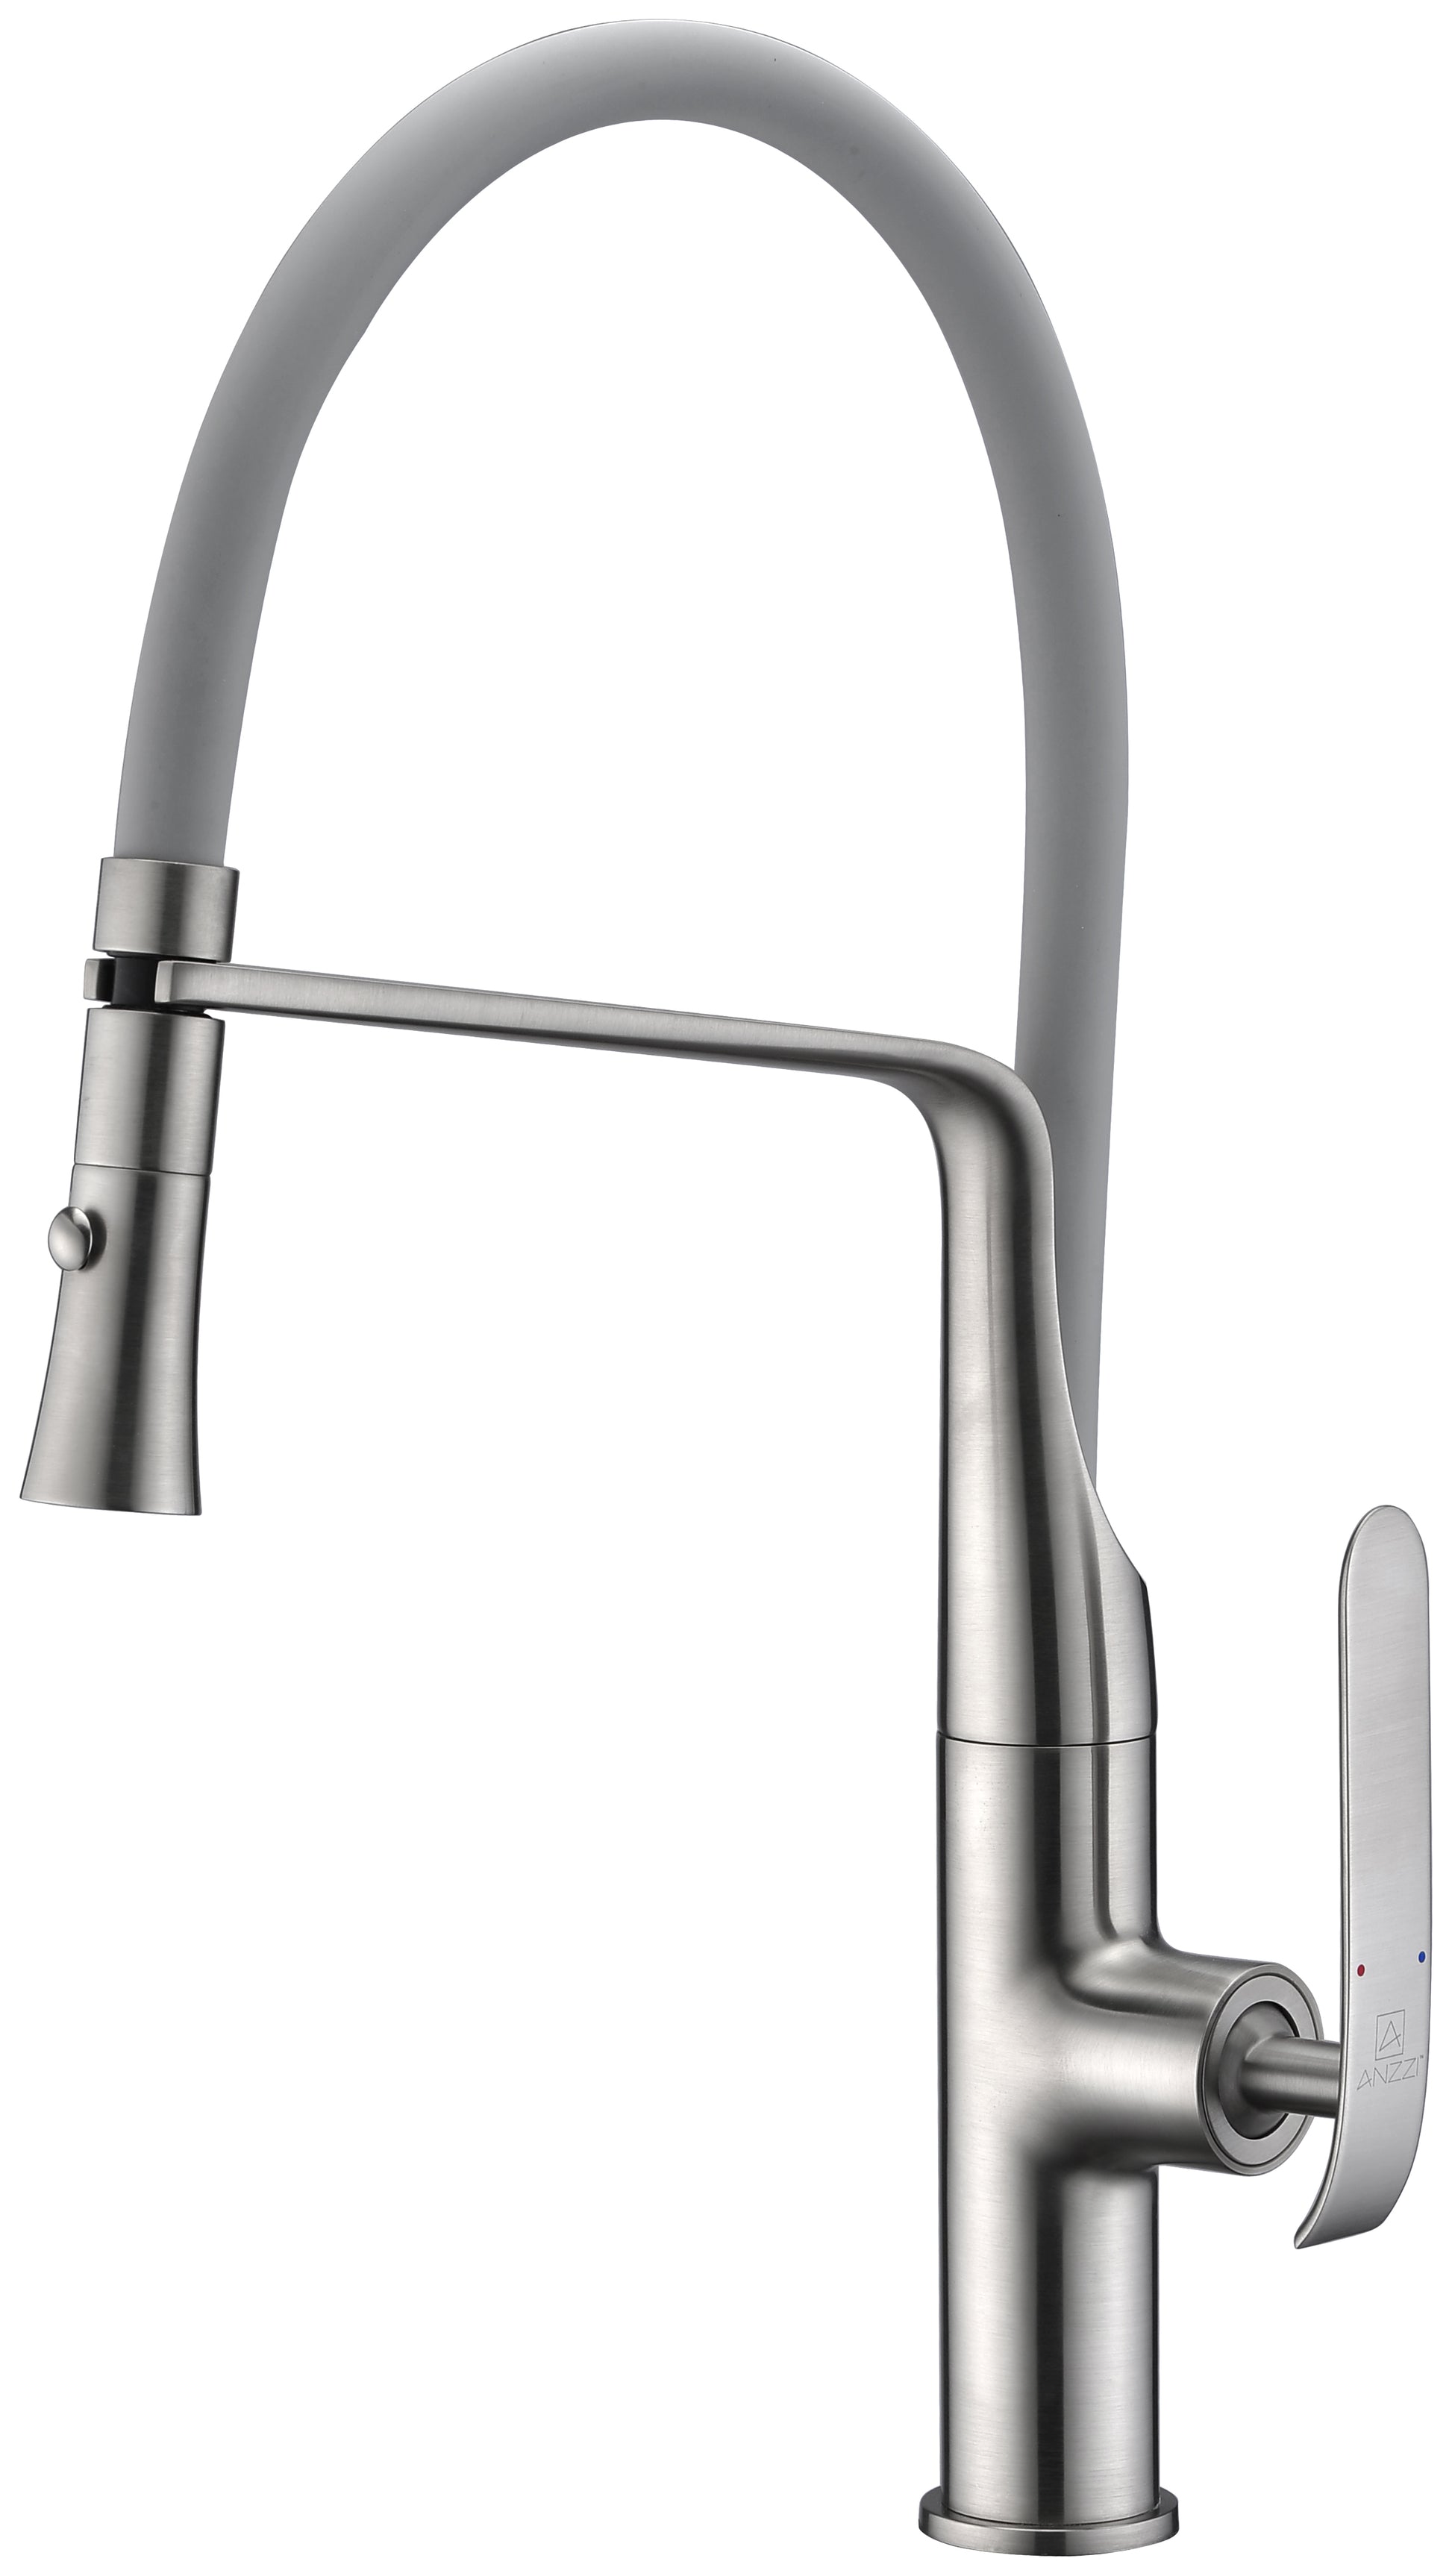 KF-AZ003BN - Accent Single Handle Pull-Down Sprayer Kitchen Faucet in Brushed Nickel